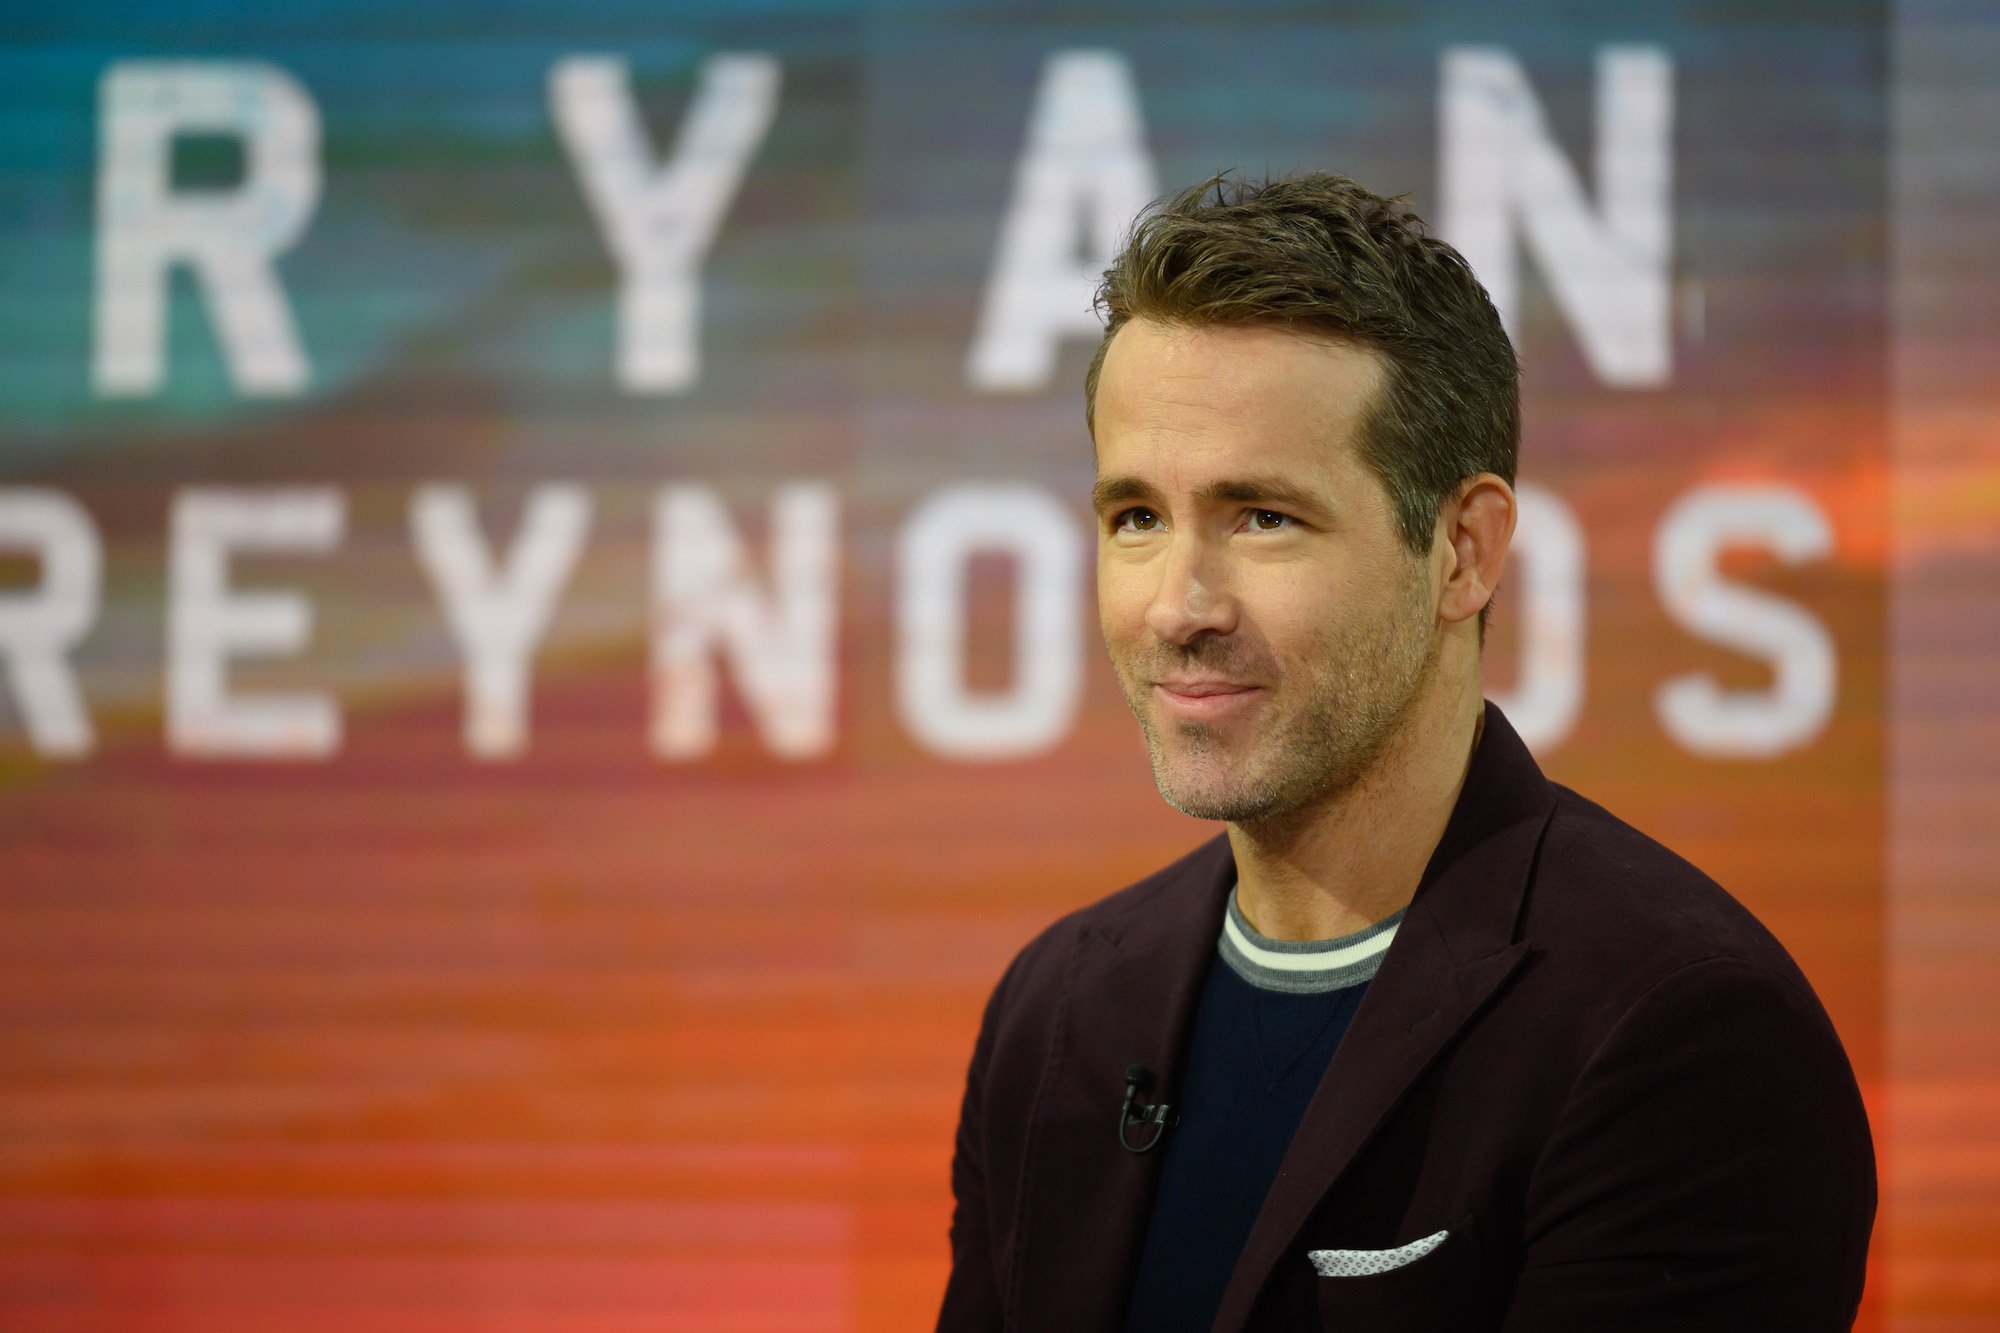 Ryan Reynolds smiling in front of an orange and blue background